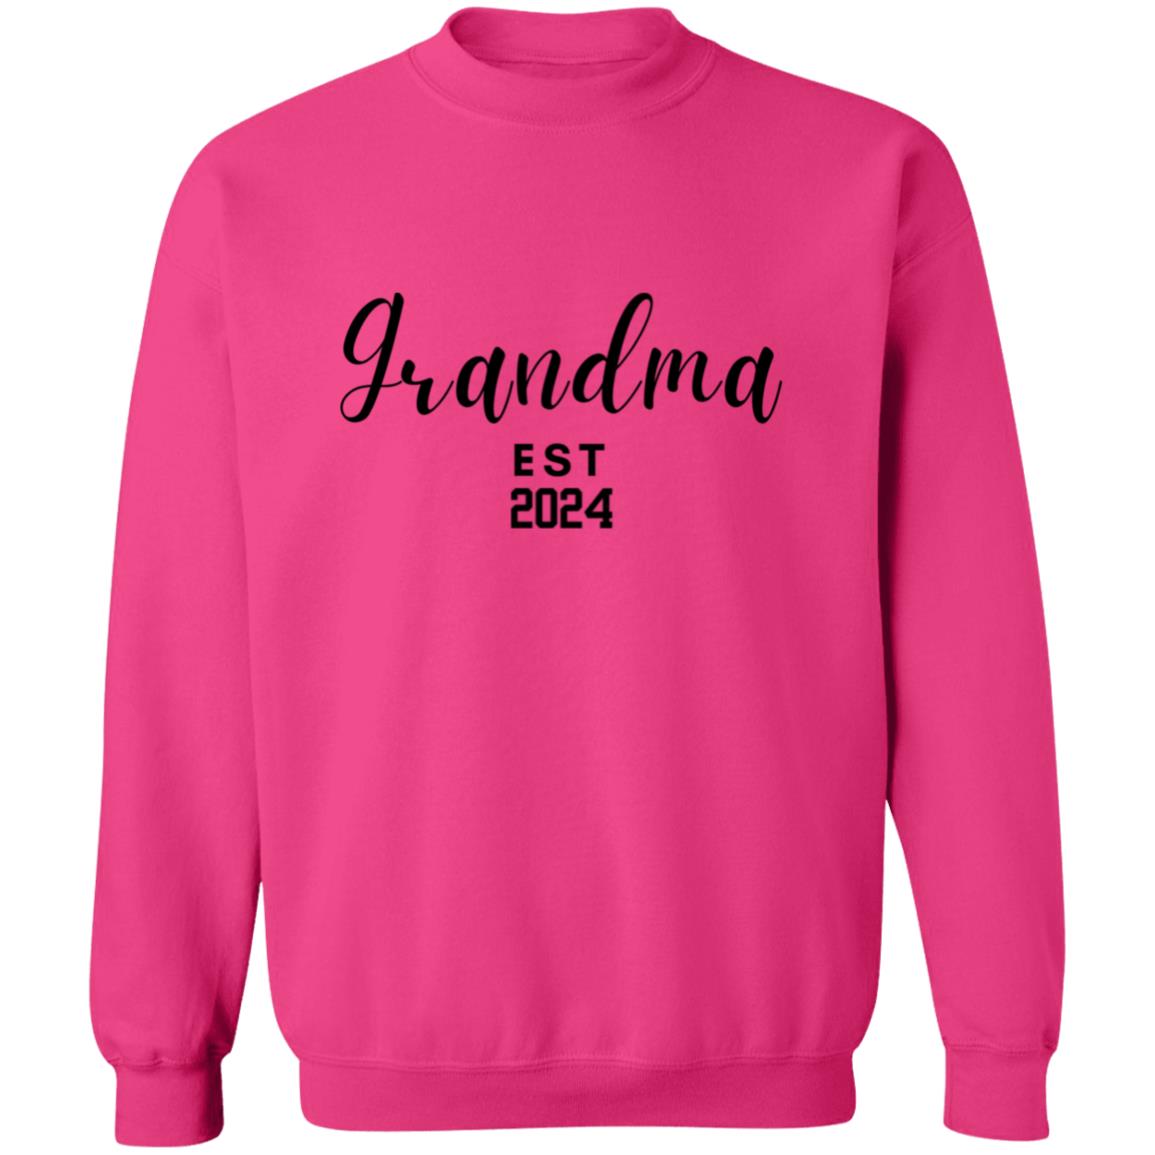 Get trendy with Grandma est. 2023 (6) Grandma Est (year first grandchild born)Crewneck Sweatshirt - Sweatshirts available at Good Gift Company. Grab yours for $24.95 today!